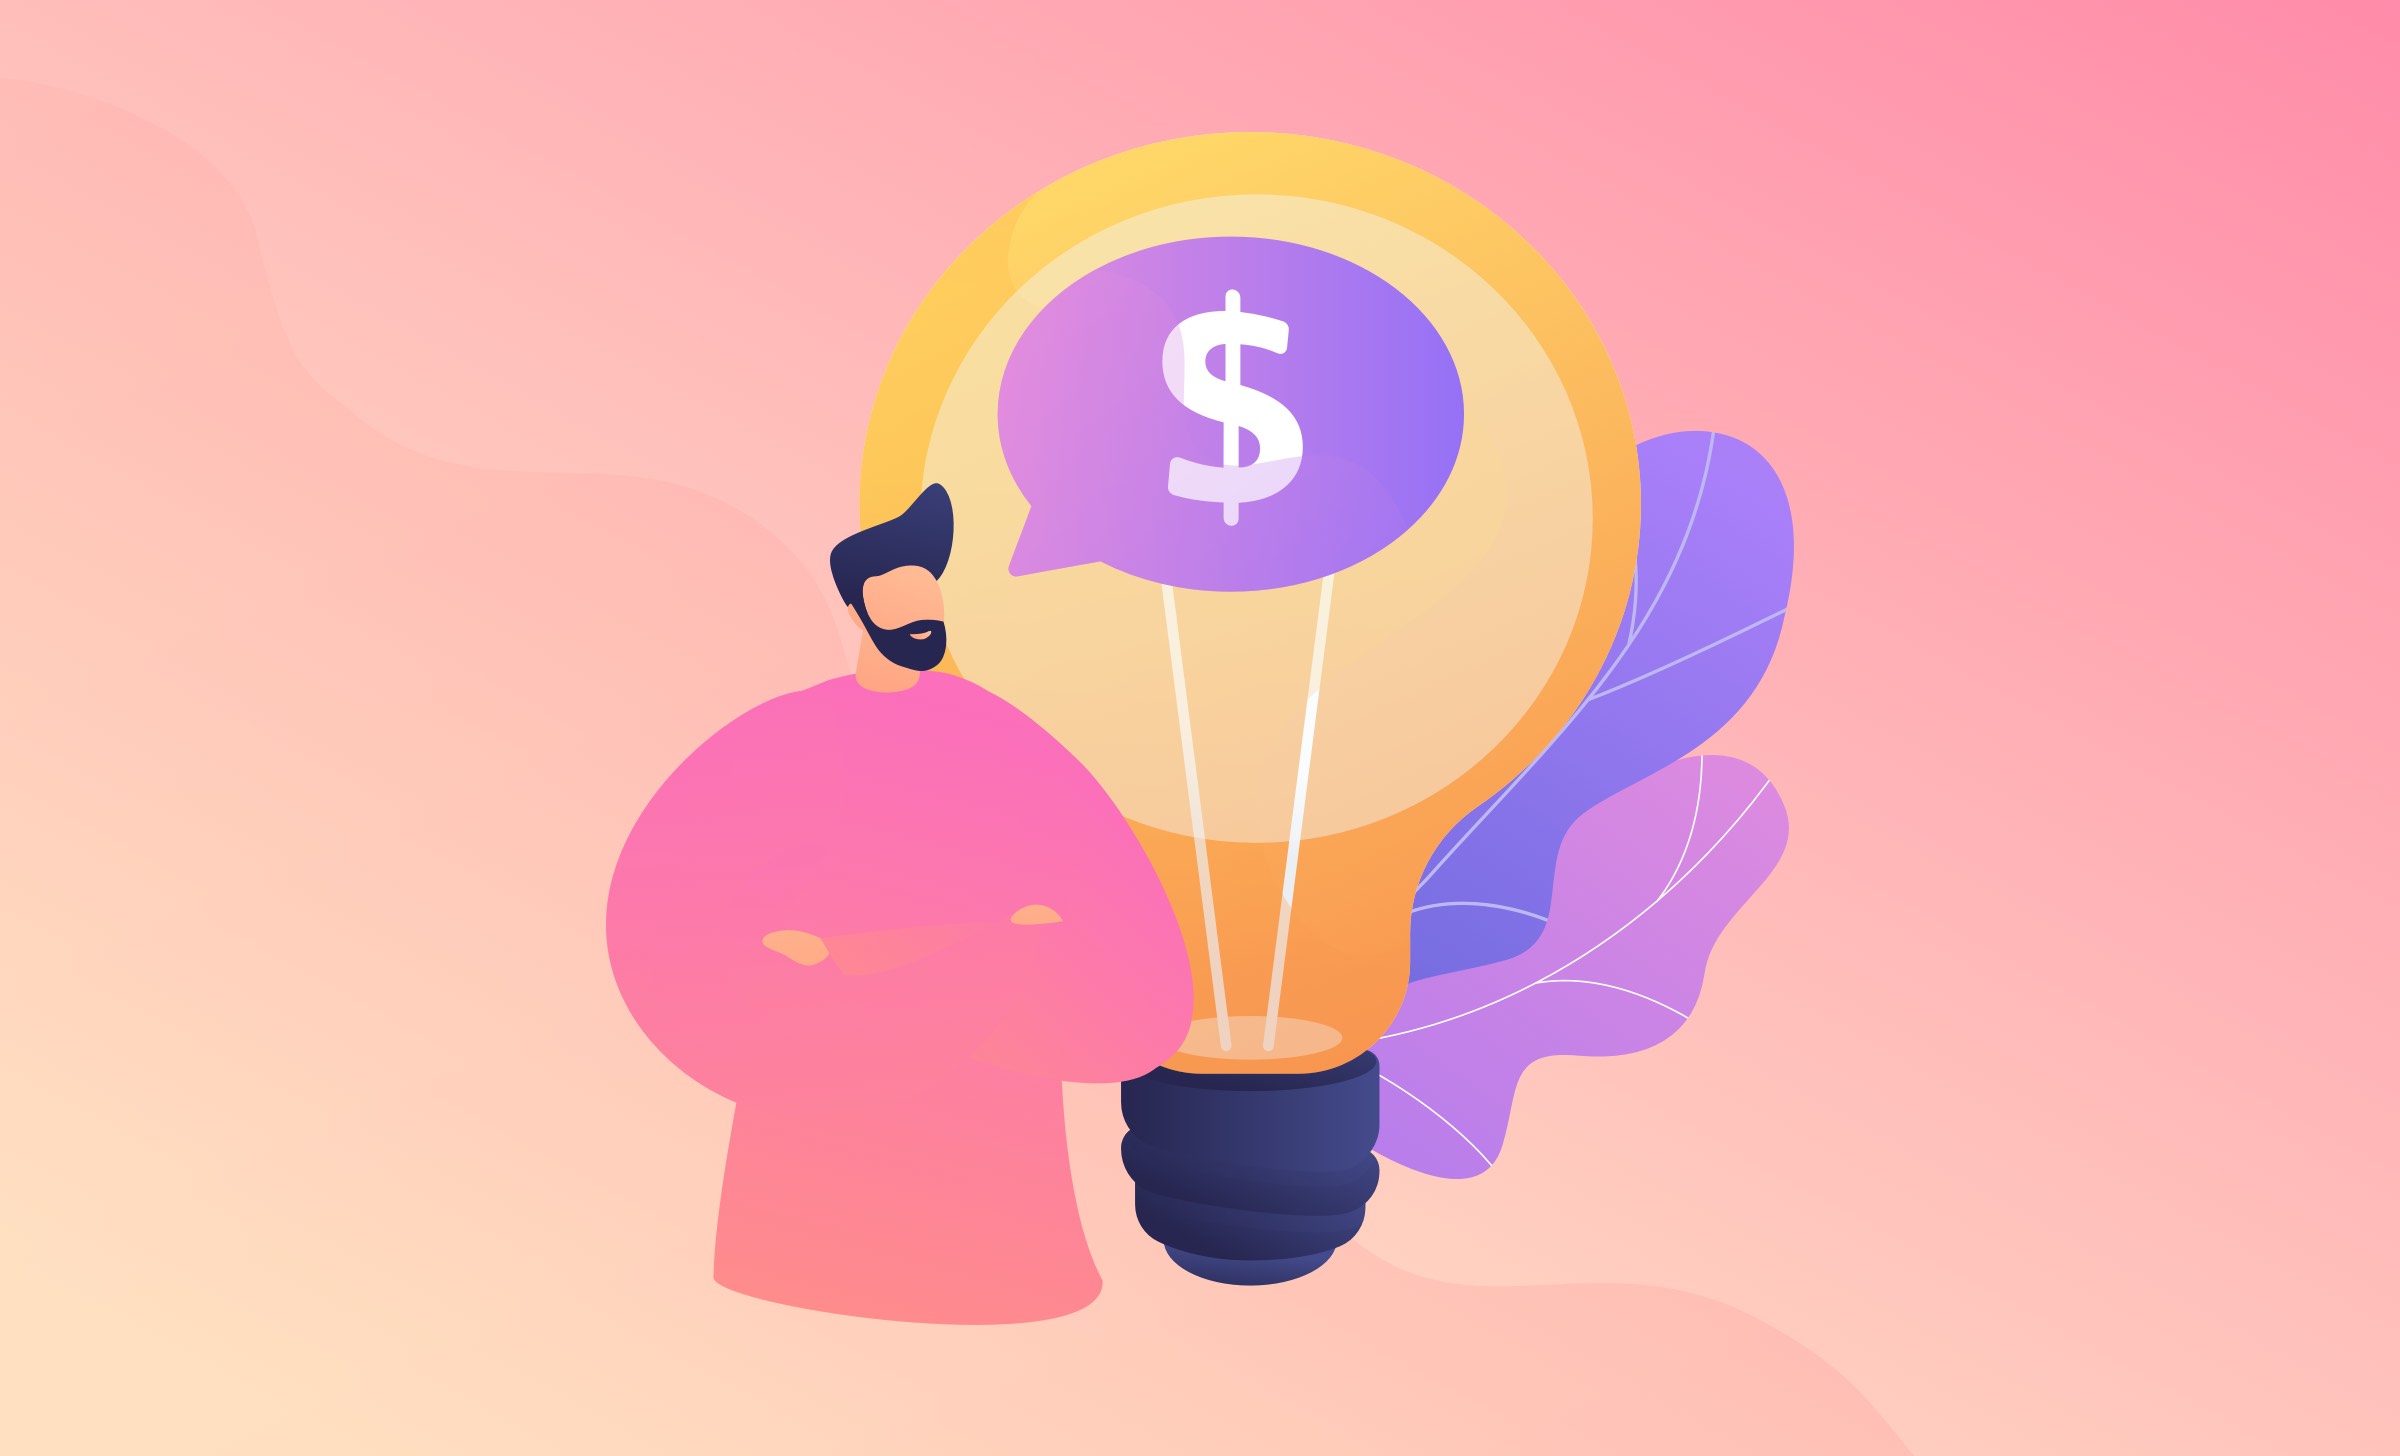 How to Monetize an App: Guide and Tips for Effective Monetization